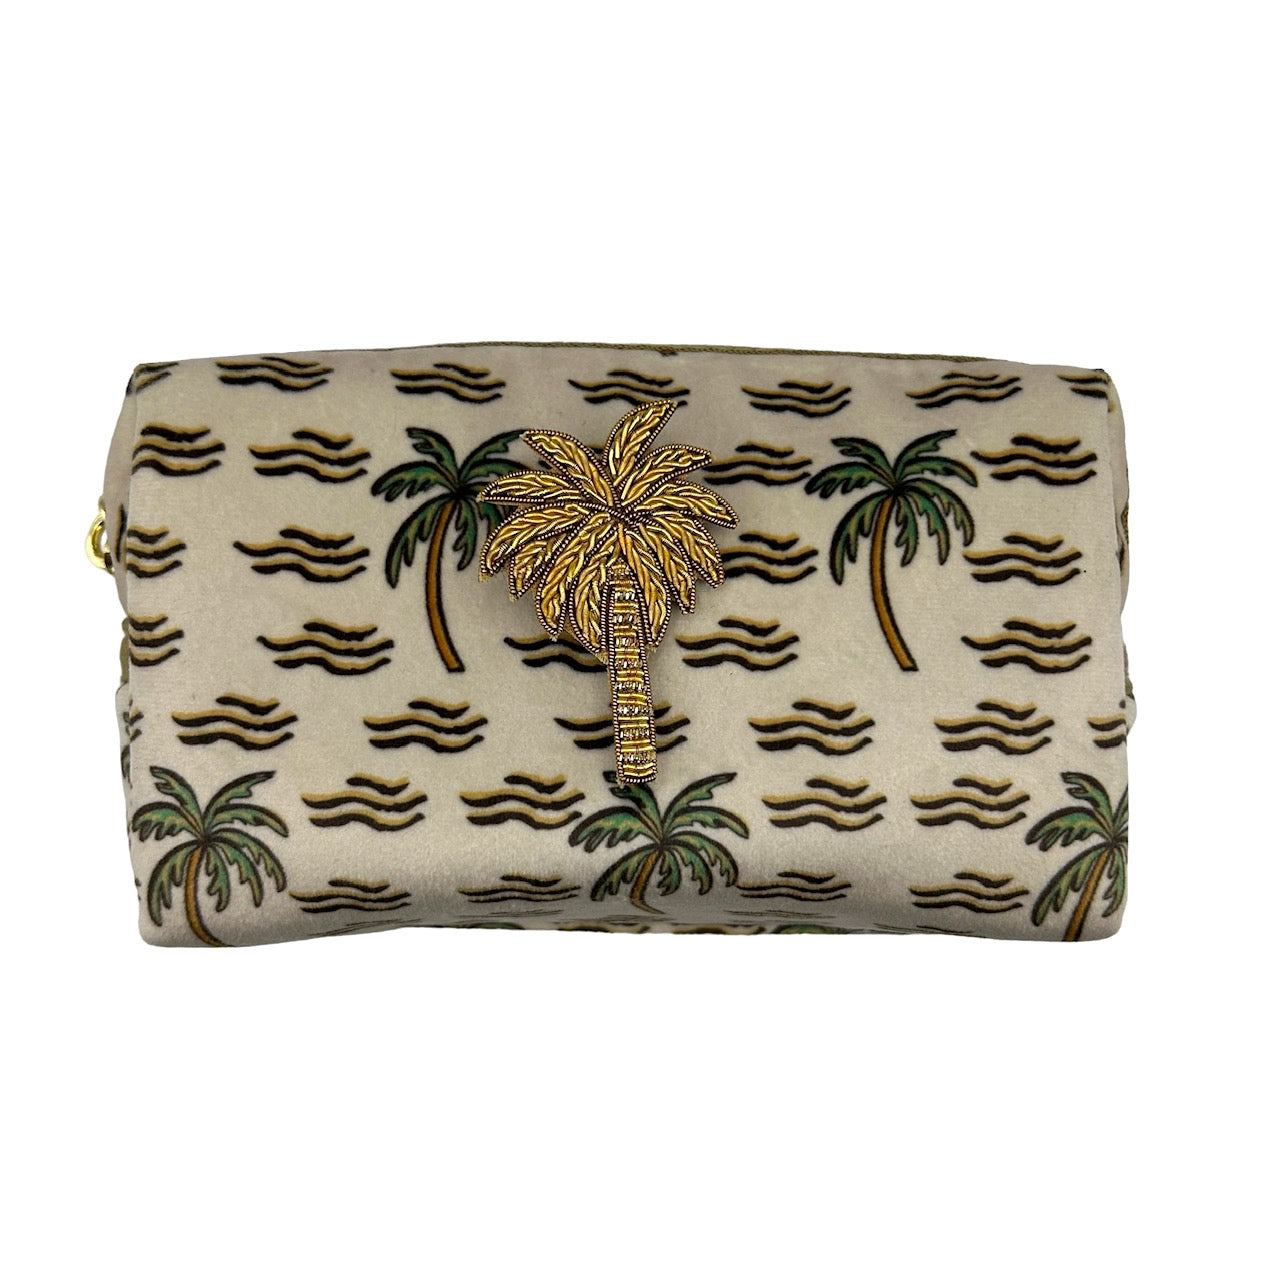 Sand palm large make-up bag & gold palm tree brooch - recycled velvet, large and small